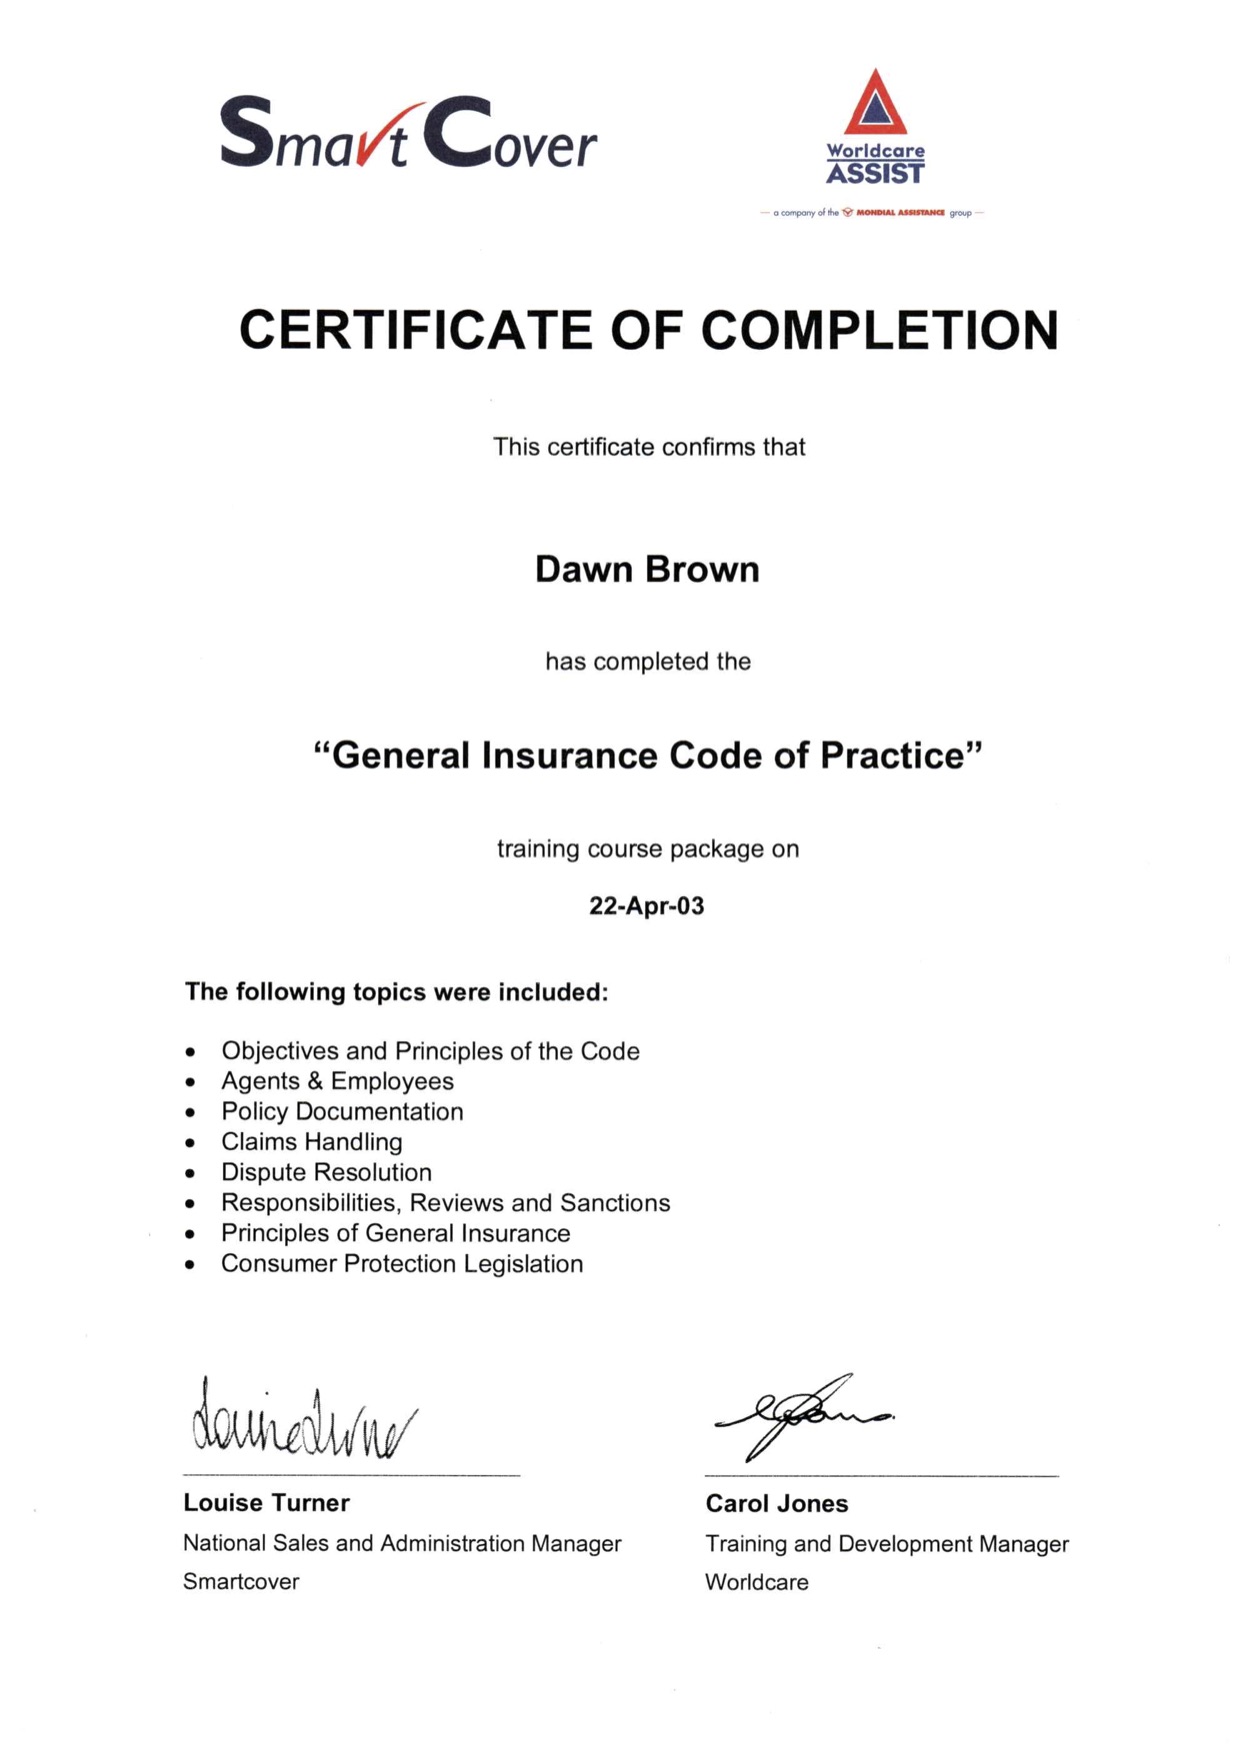 Smart cover general insurance code of practice